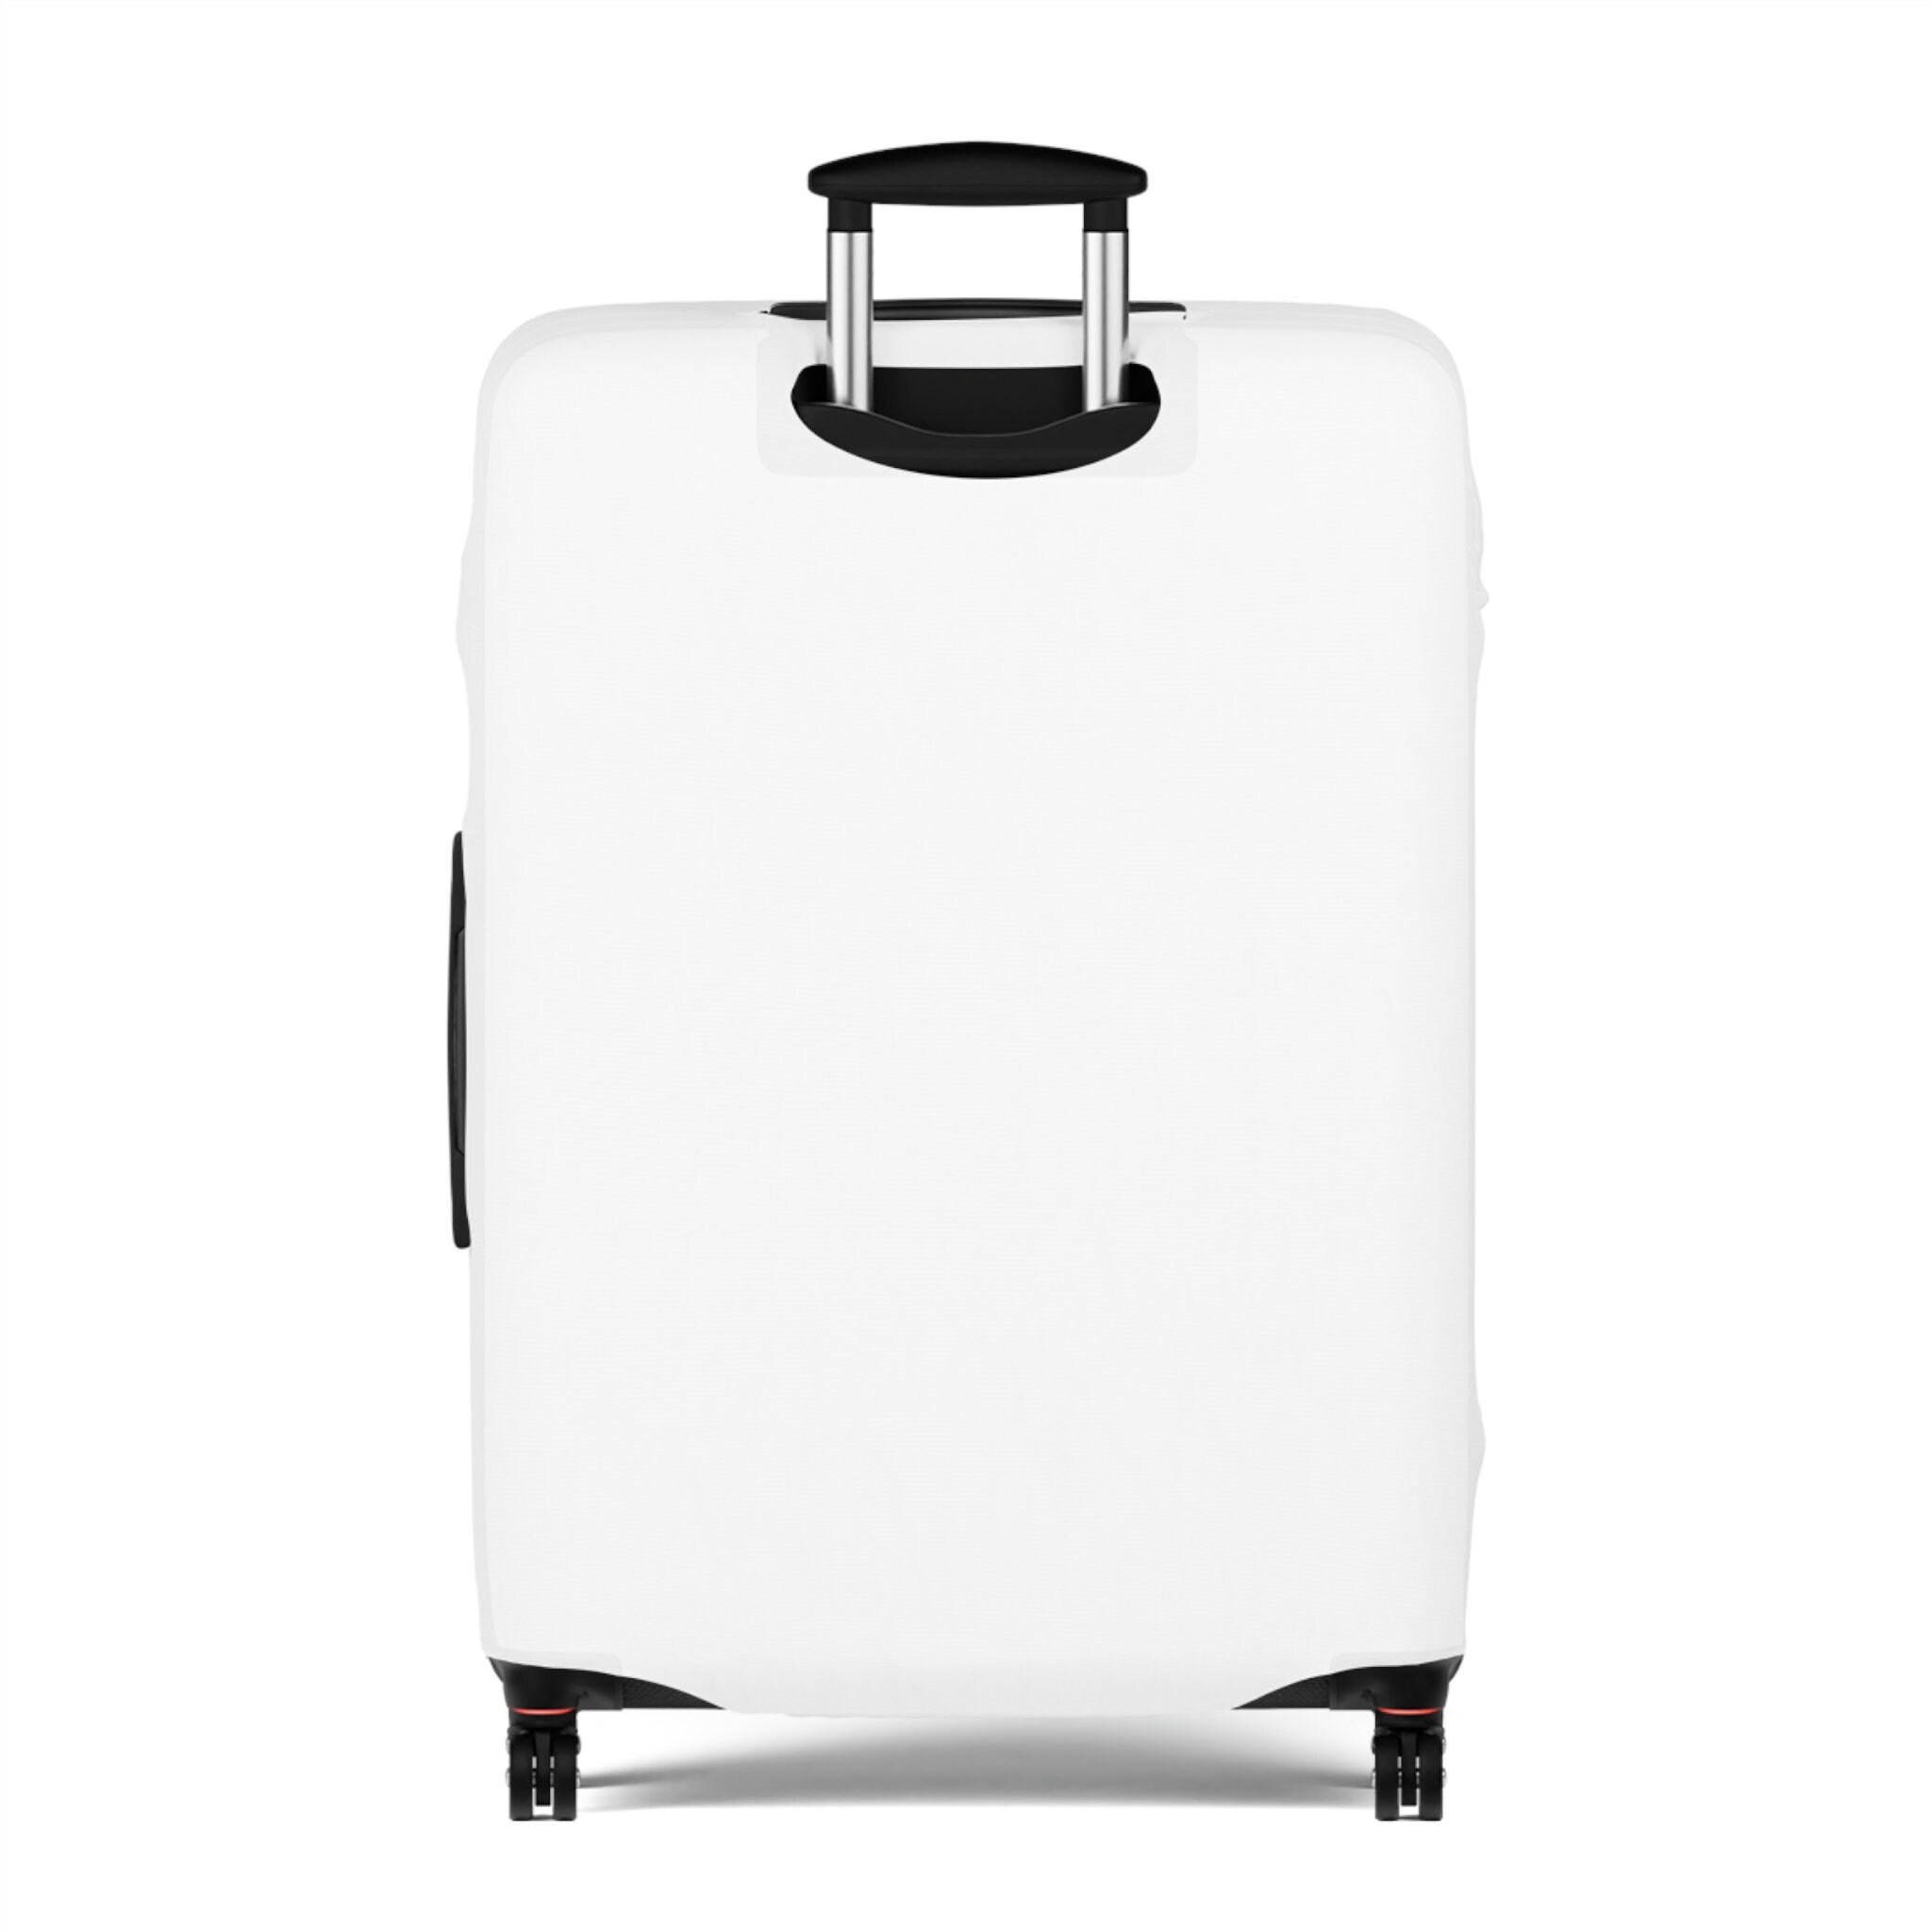 Steamboat Willie Luggage Cover